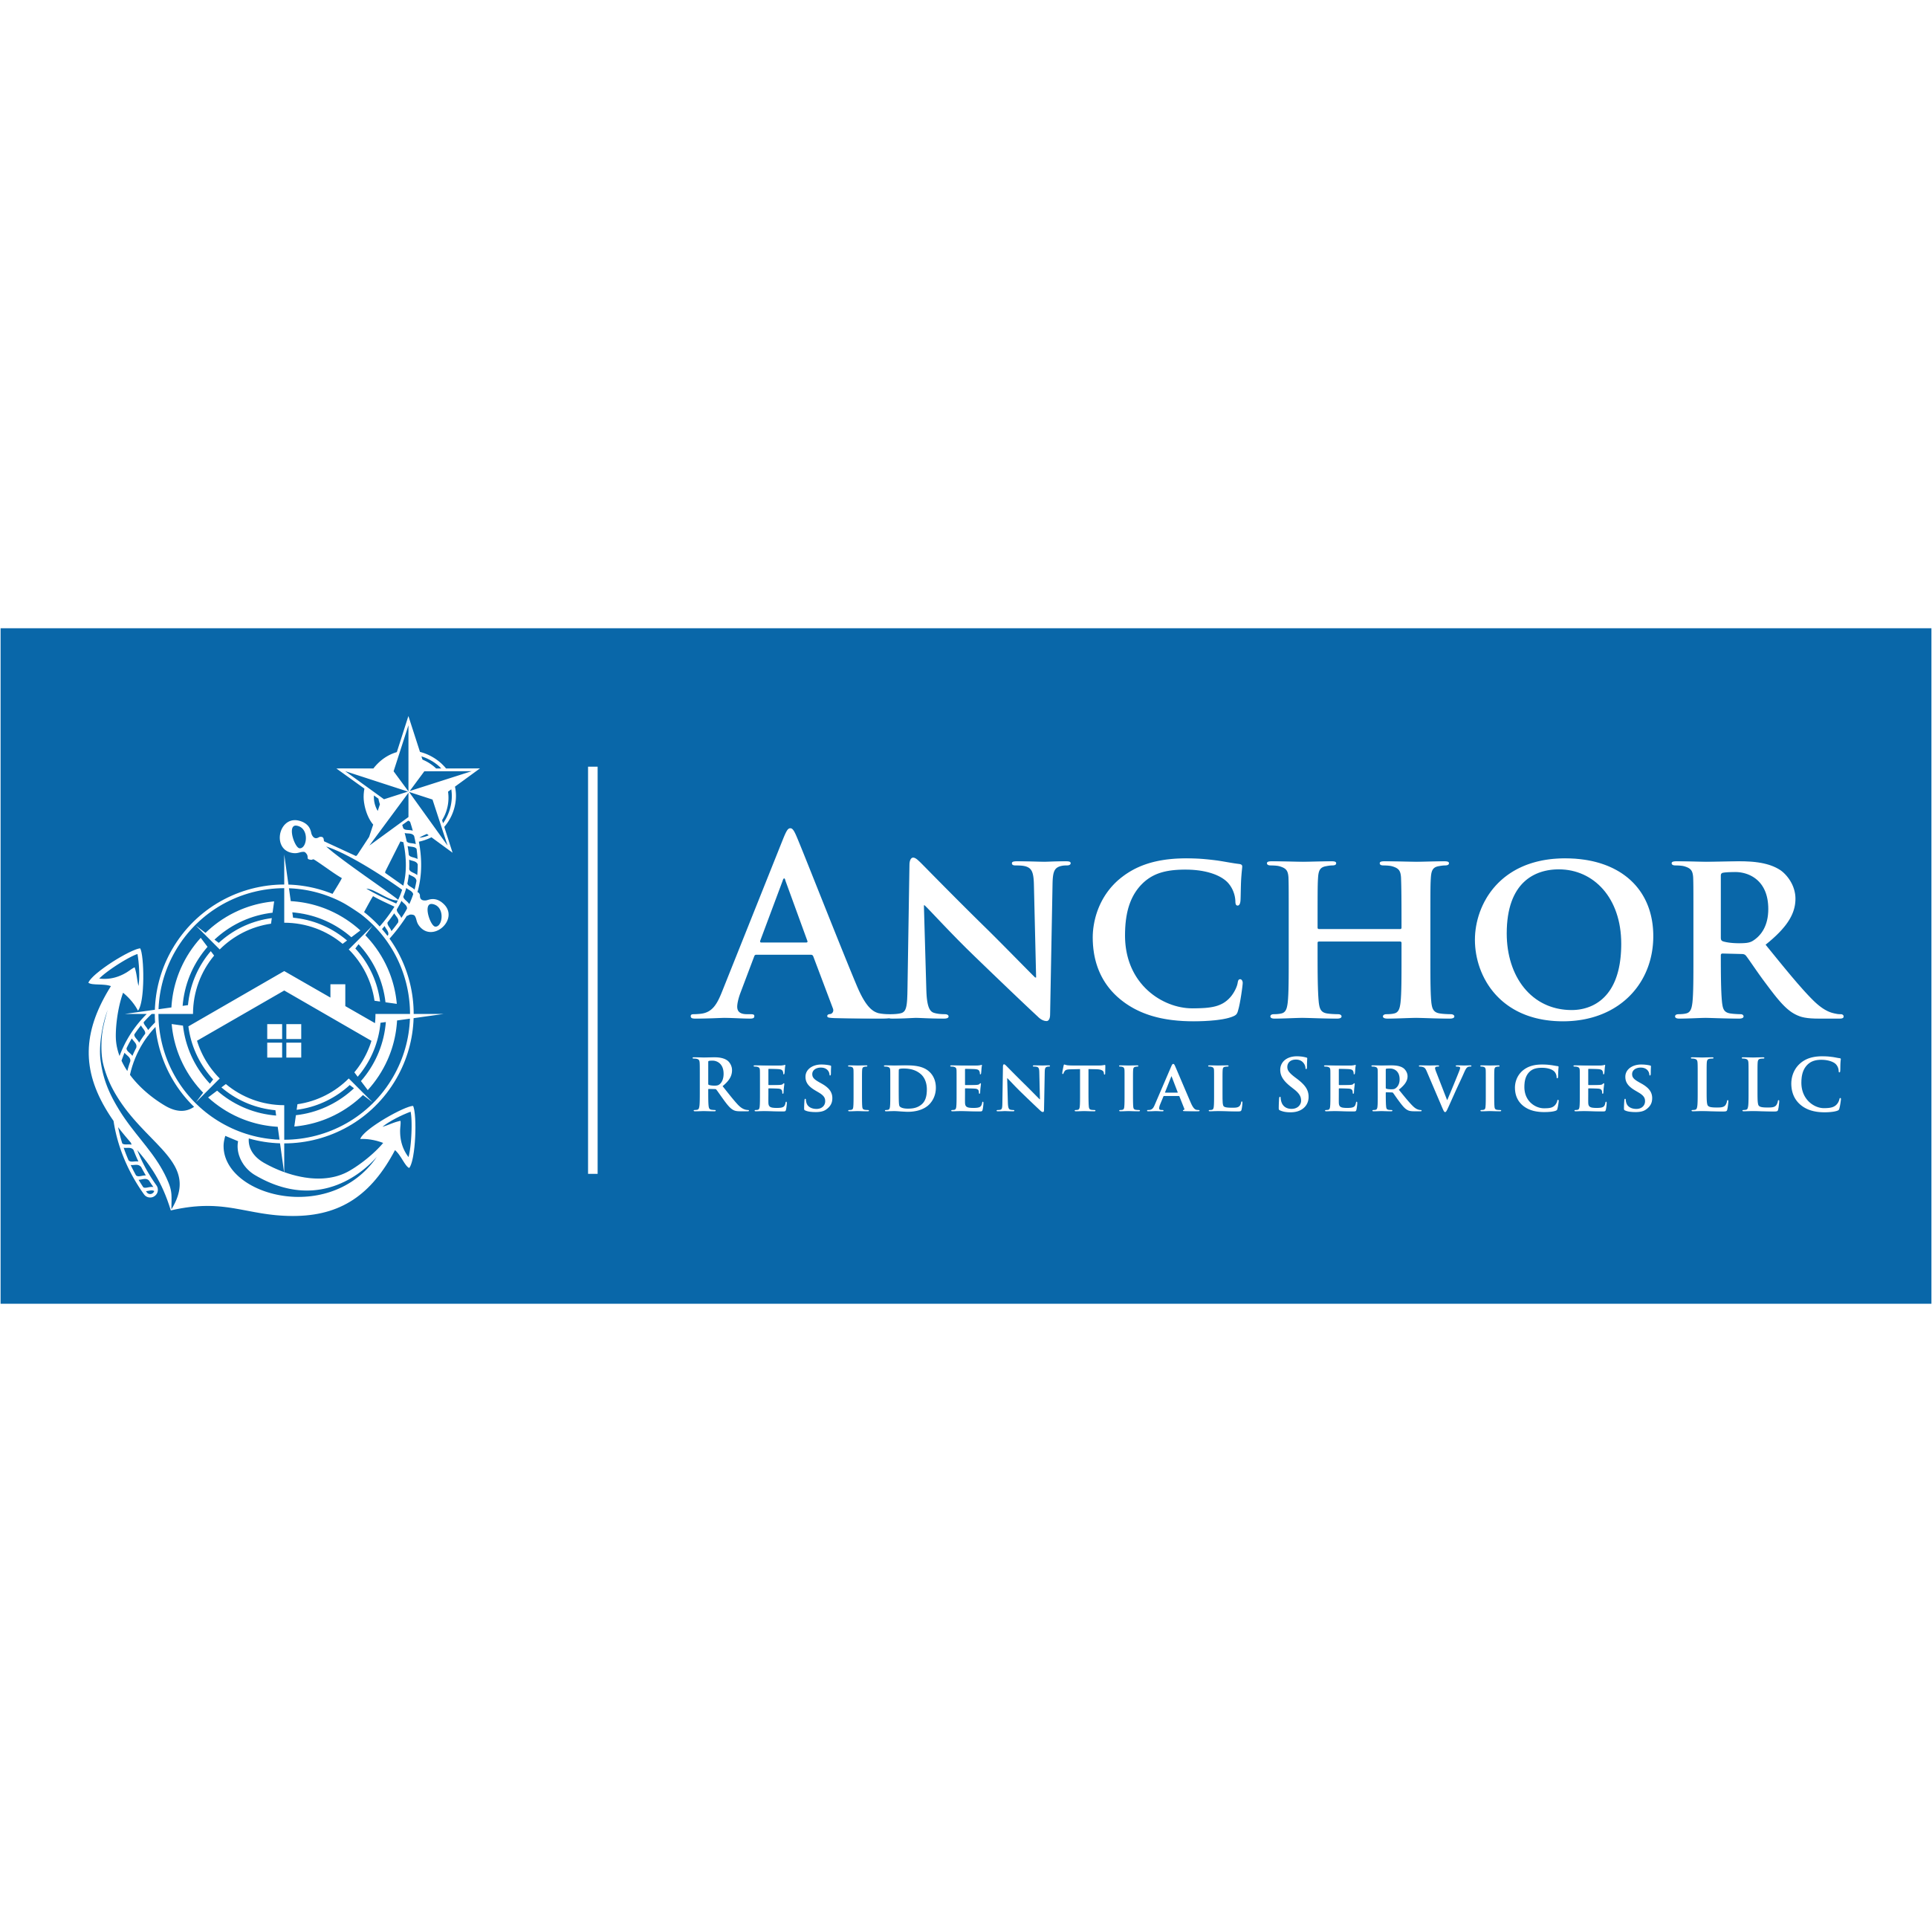 Anchor Residential Services LLC